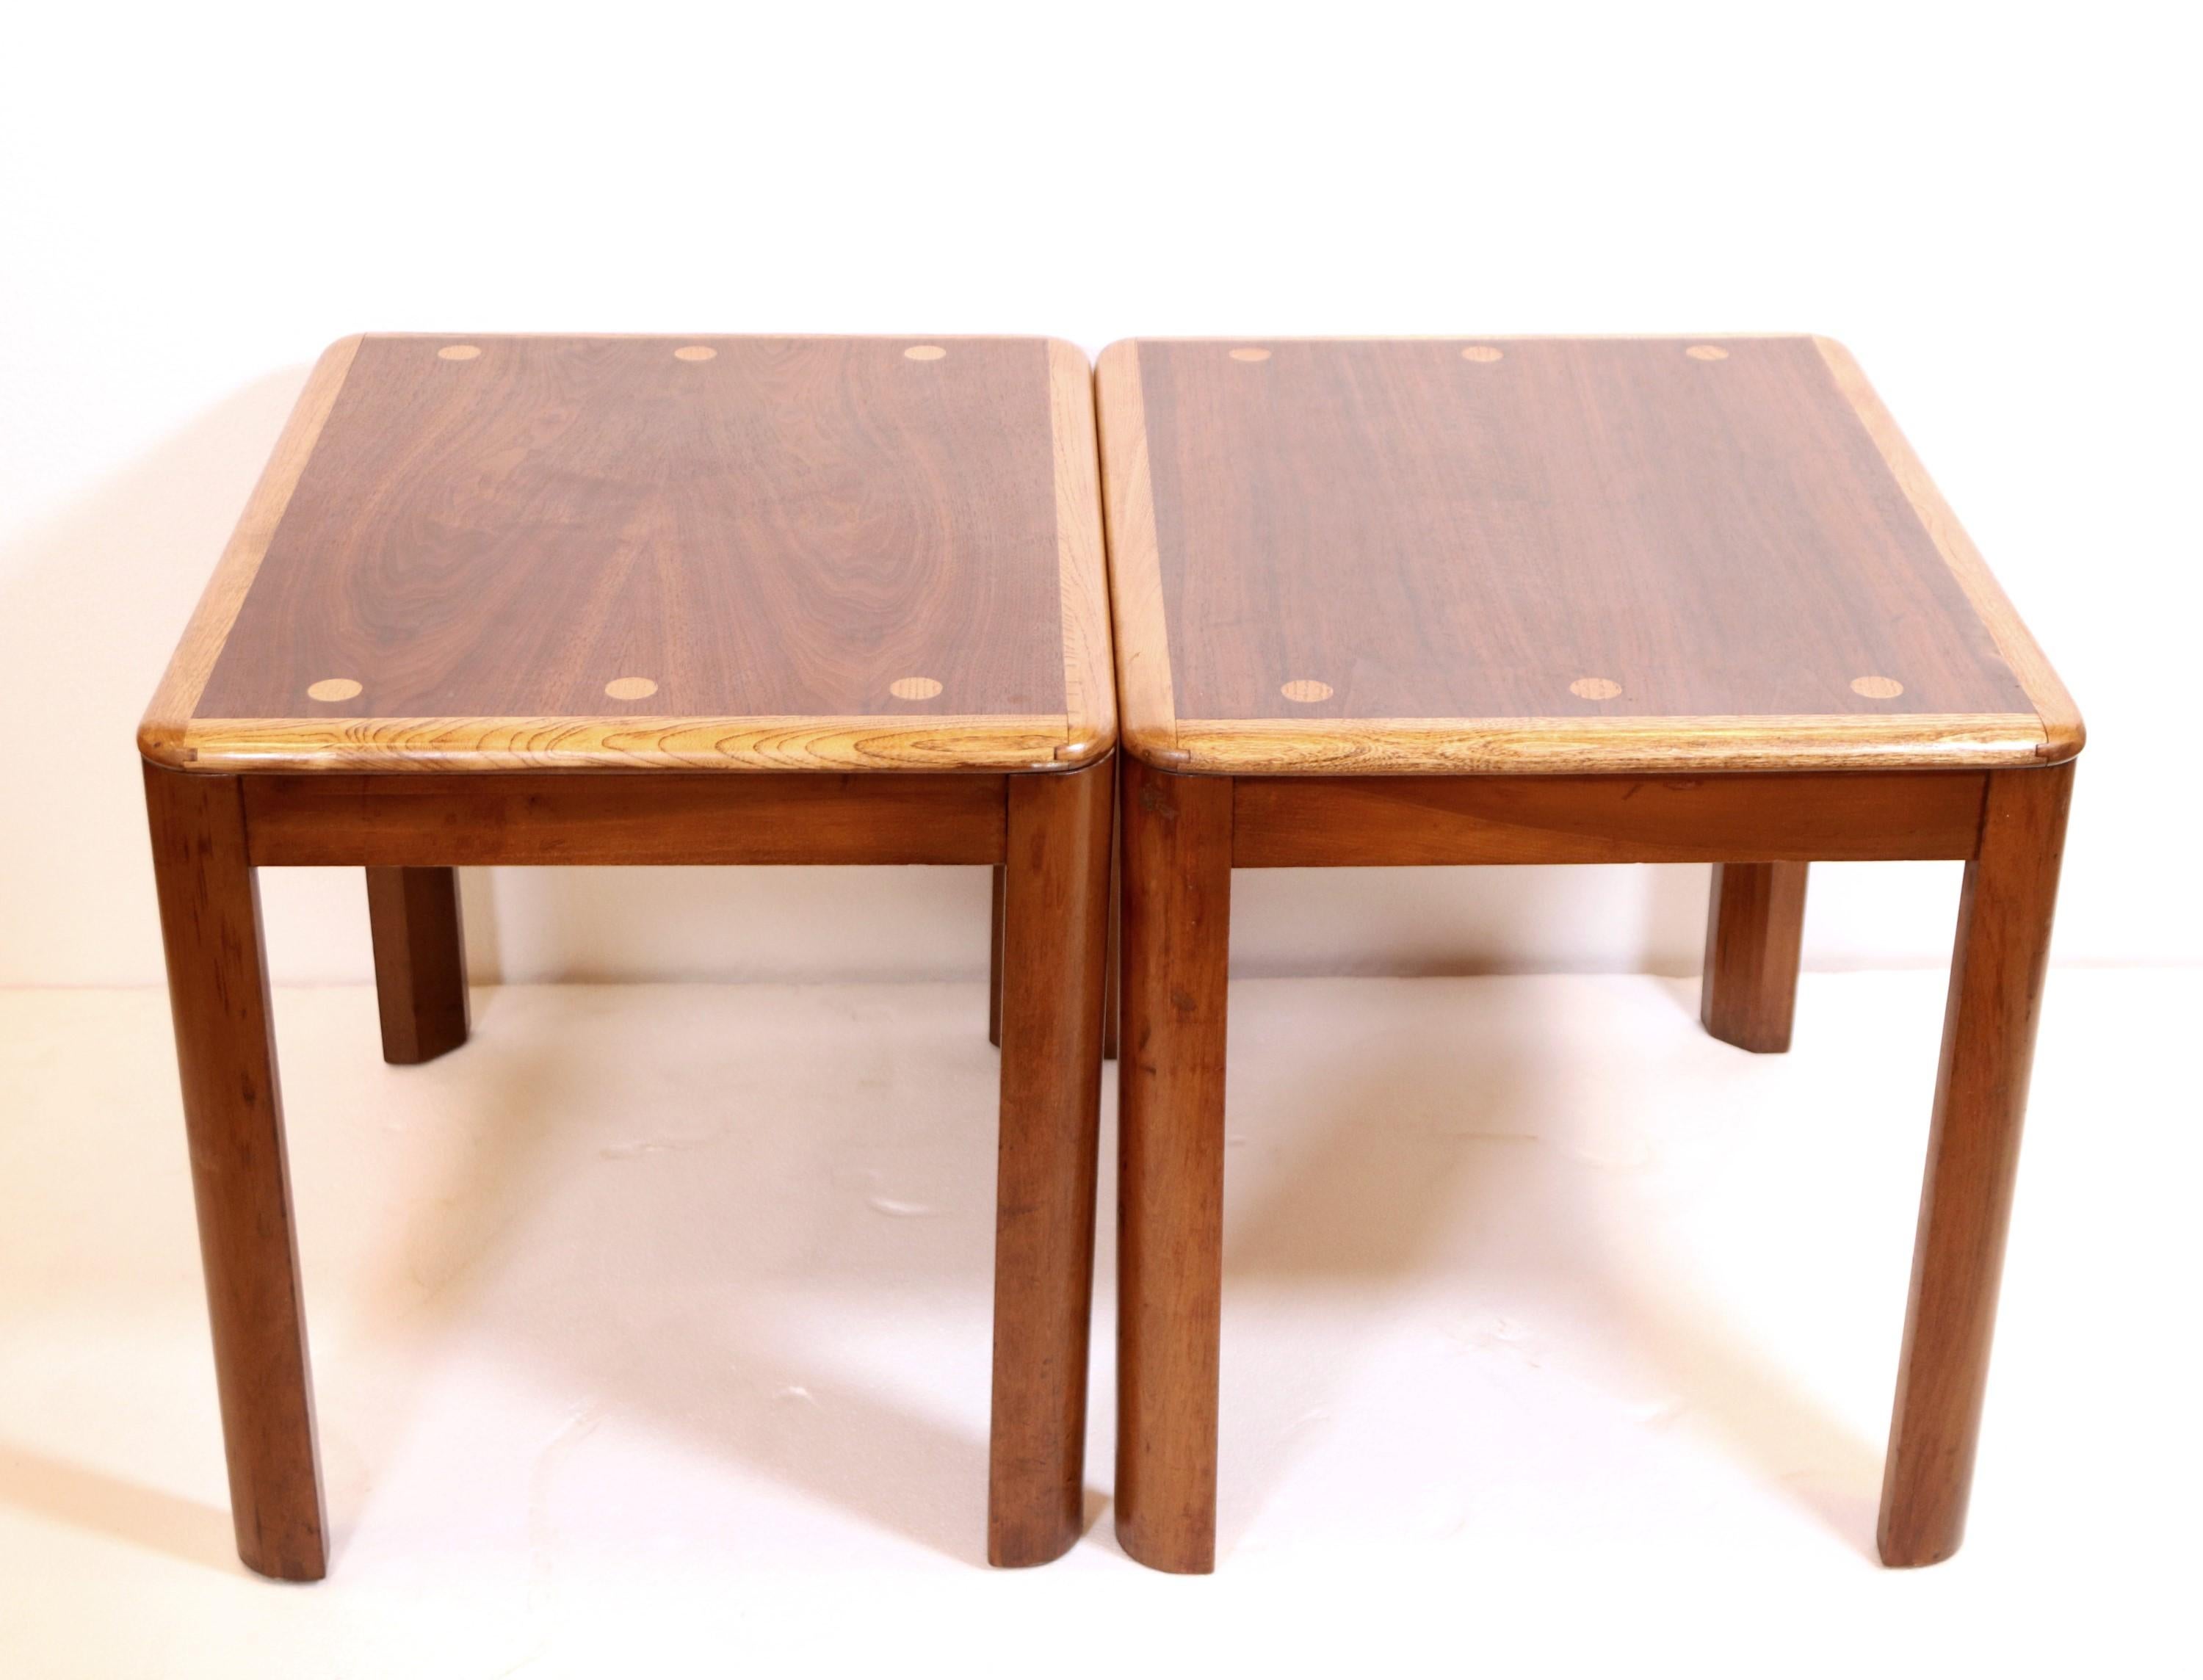 Pair of walnut and oak side tables made by Lane Furniture.  Each table is decorated with three dots on each side.  The Lane style number is 1595 05. Serial number 2672010. Priced for the pair. Please note, this item is located in one of our NYC